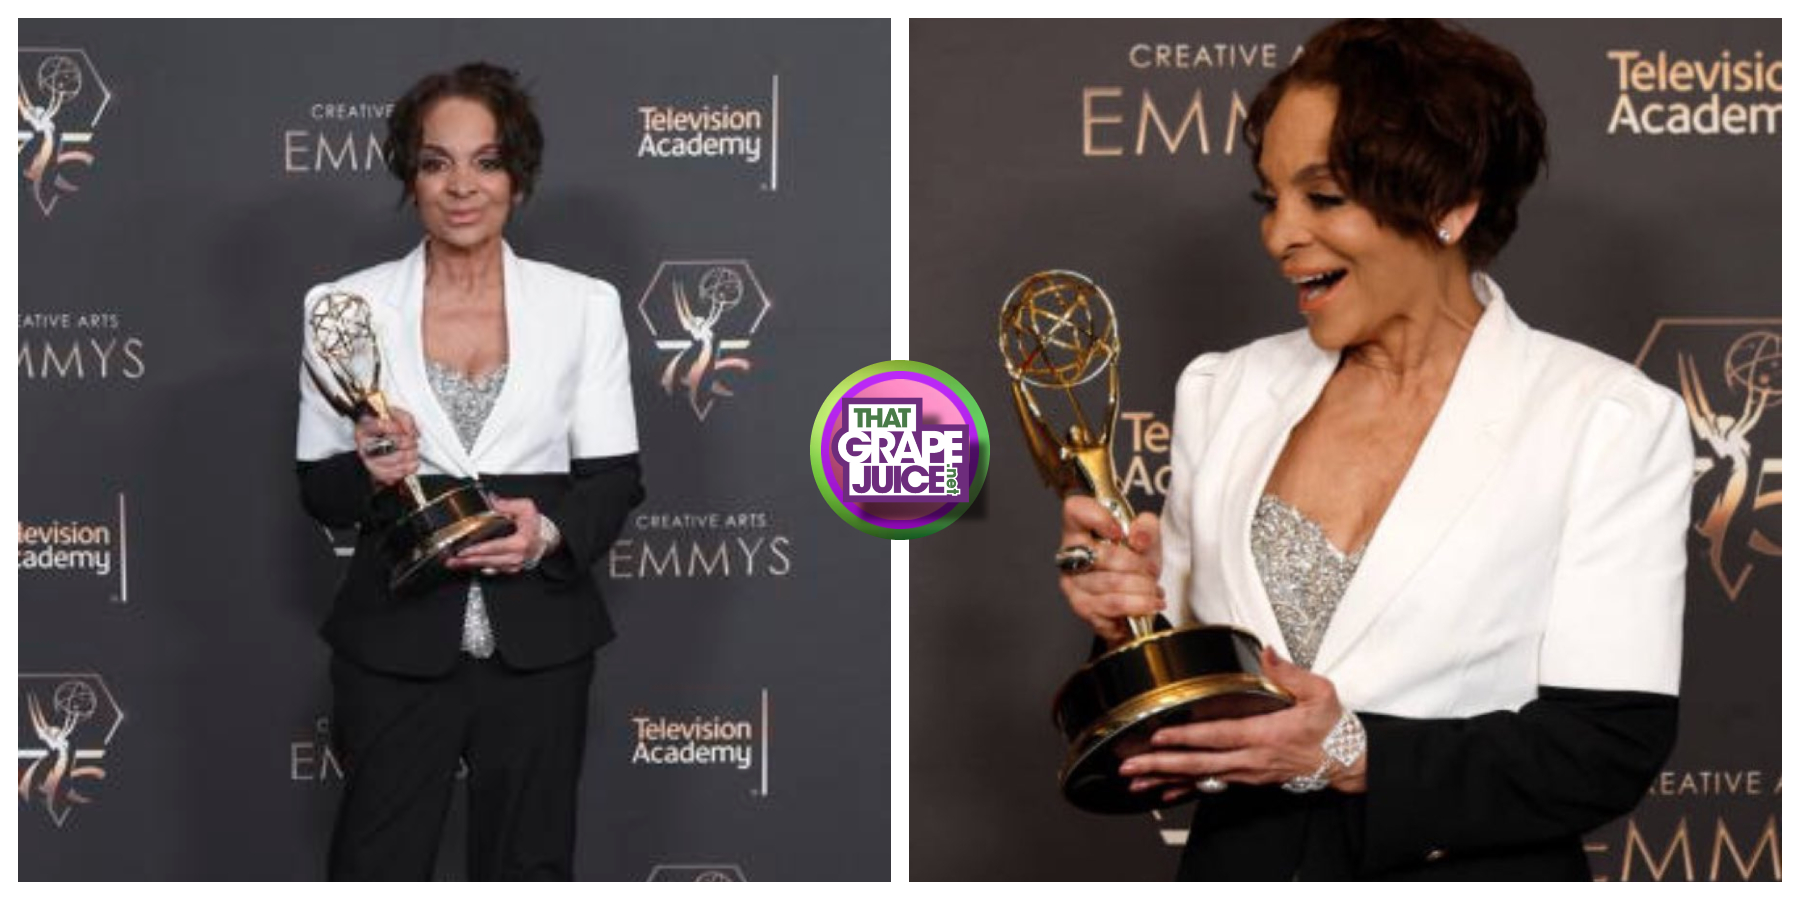 She Did It! Over 40 Years After Her First TV Appearance, Jasmine Guy Won Her First EMMY